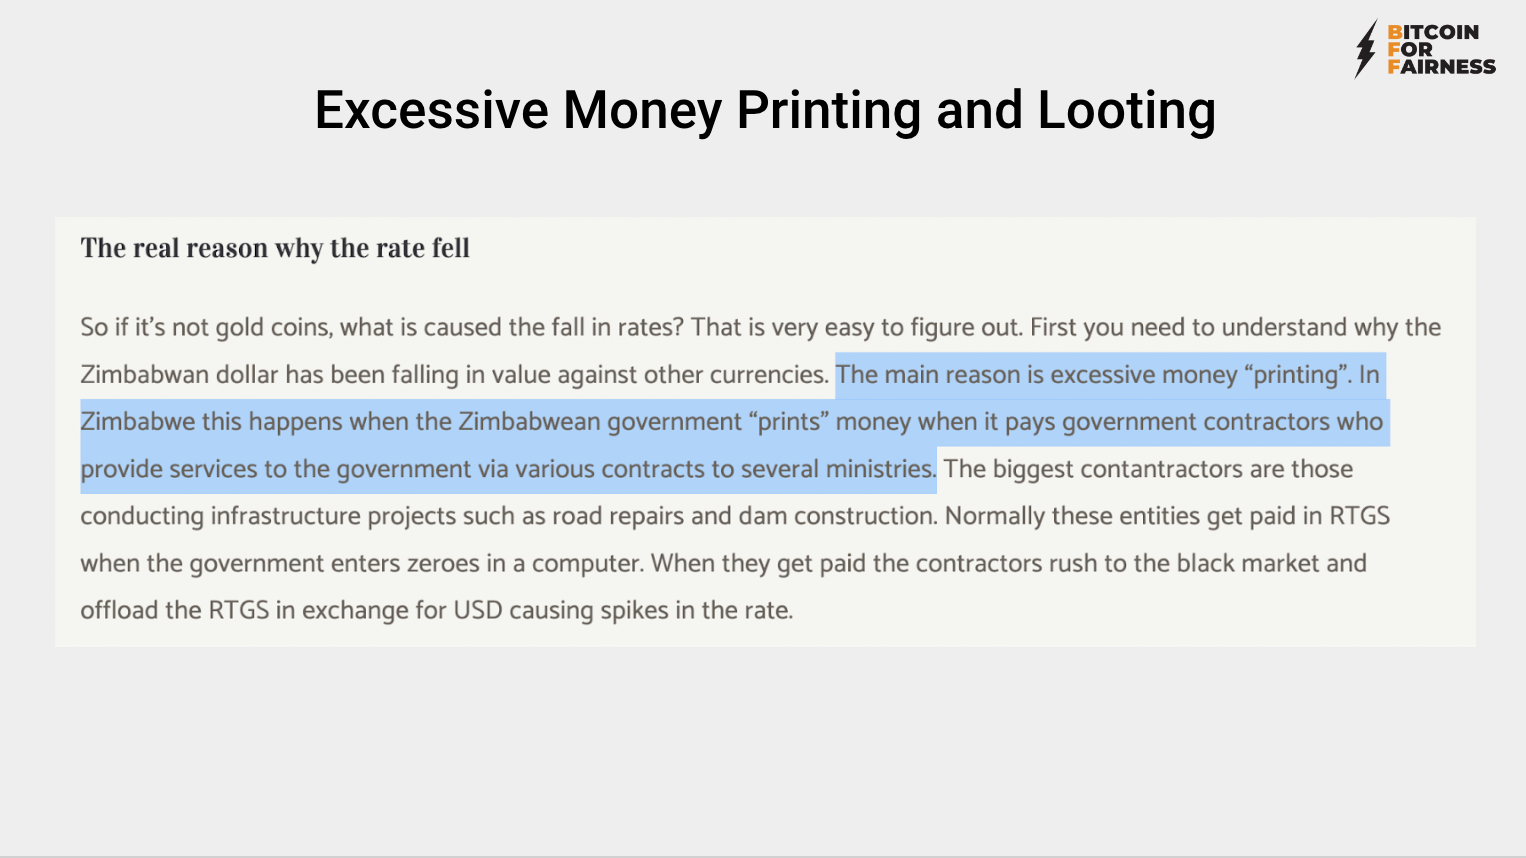 The main reason is excessive money “printing”.